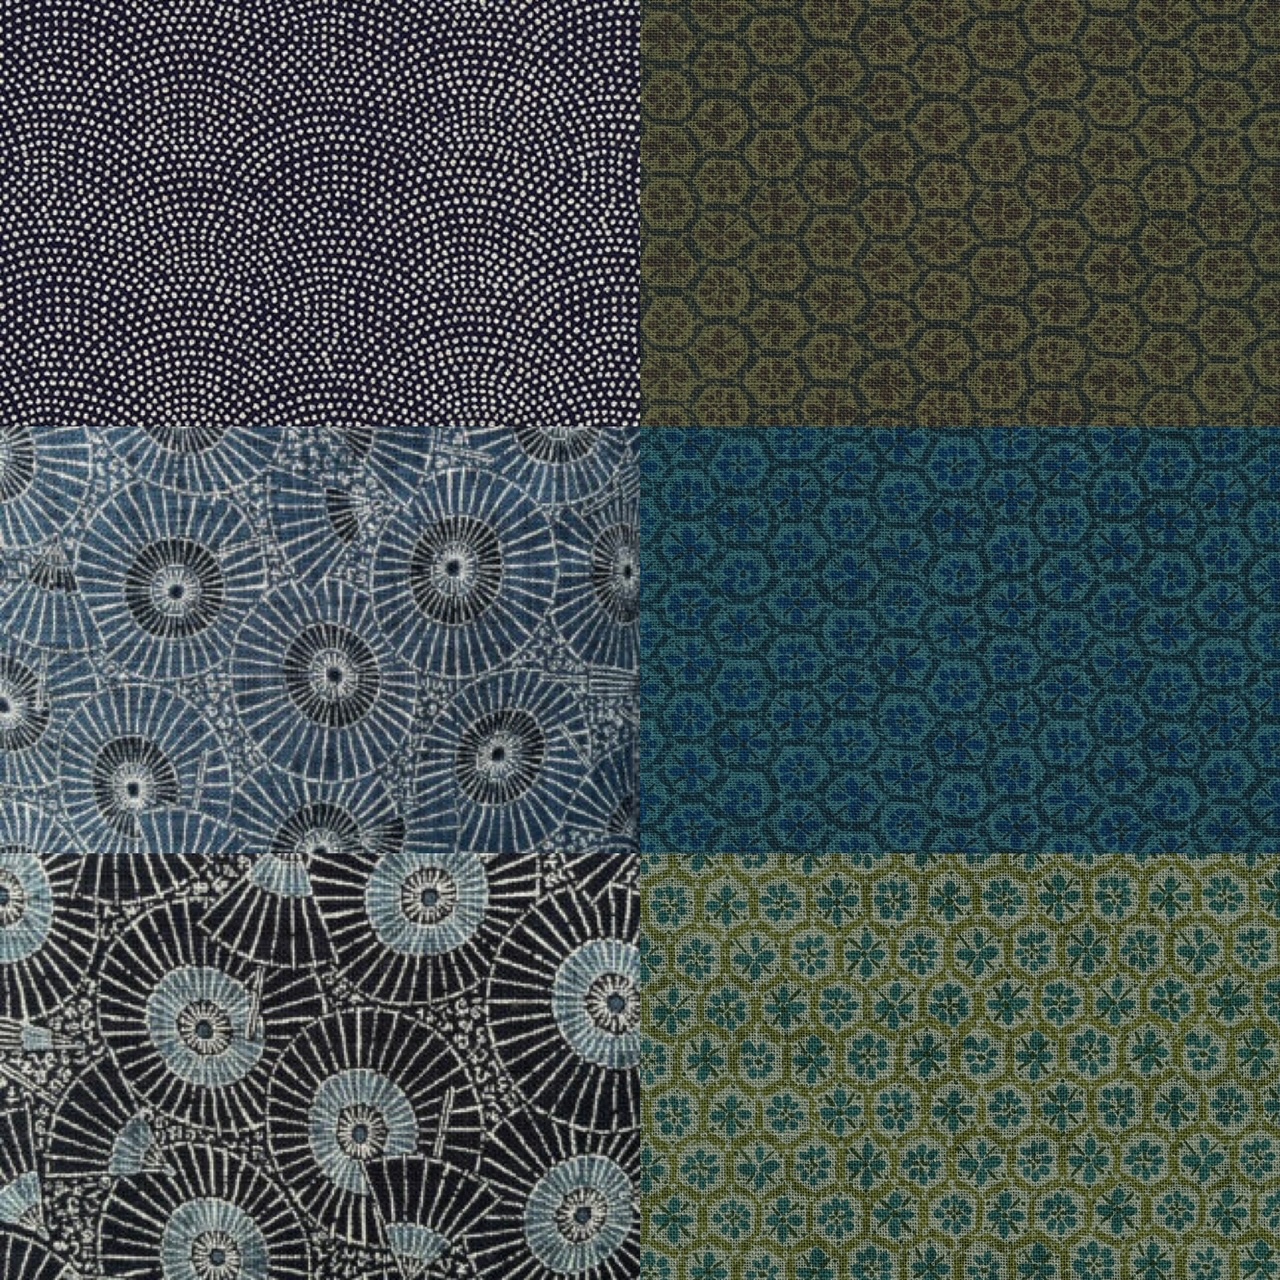 Japanese Woven Textures 2